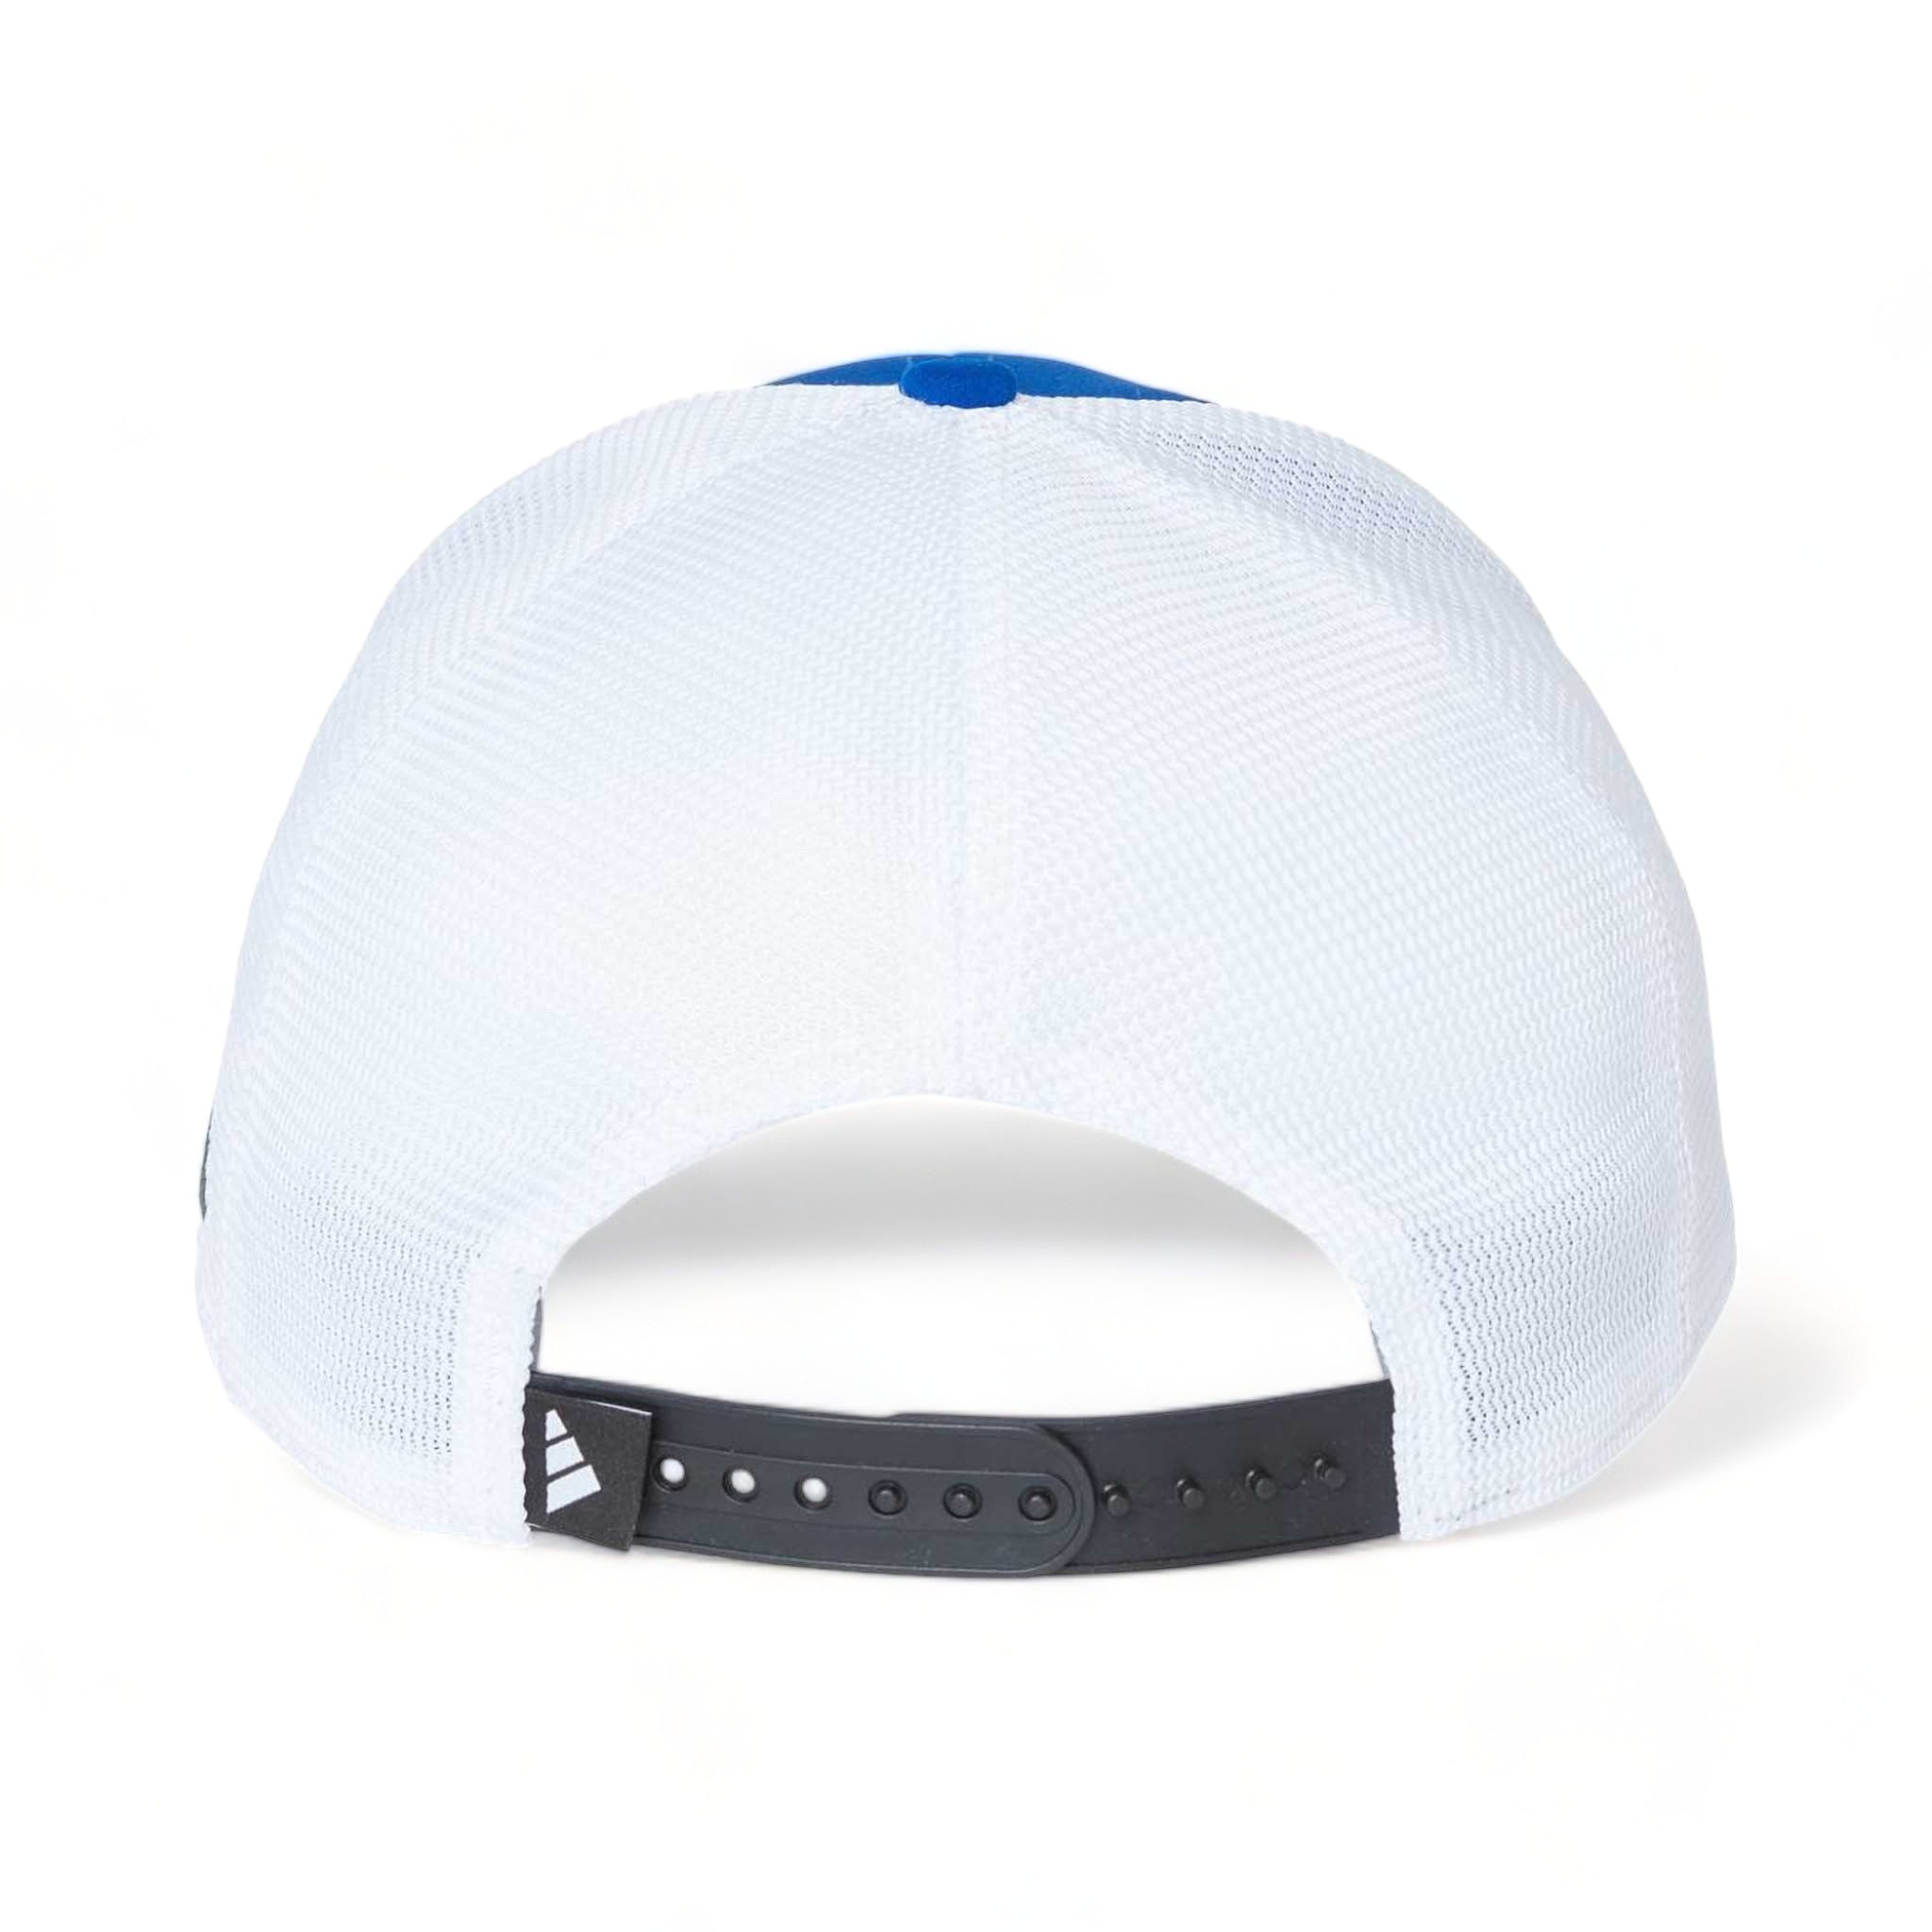 Back view of Adidas A627S custom hat in collegiate royal